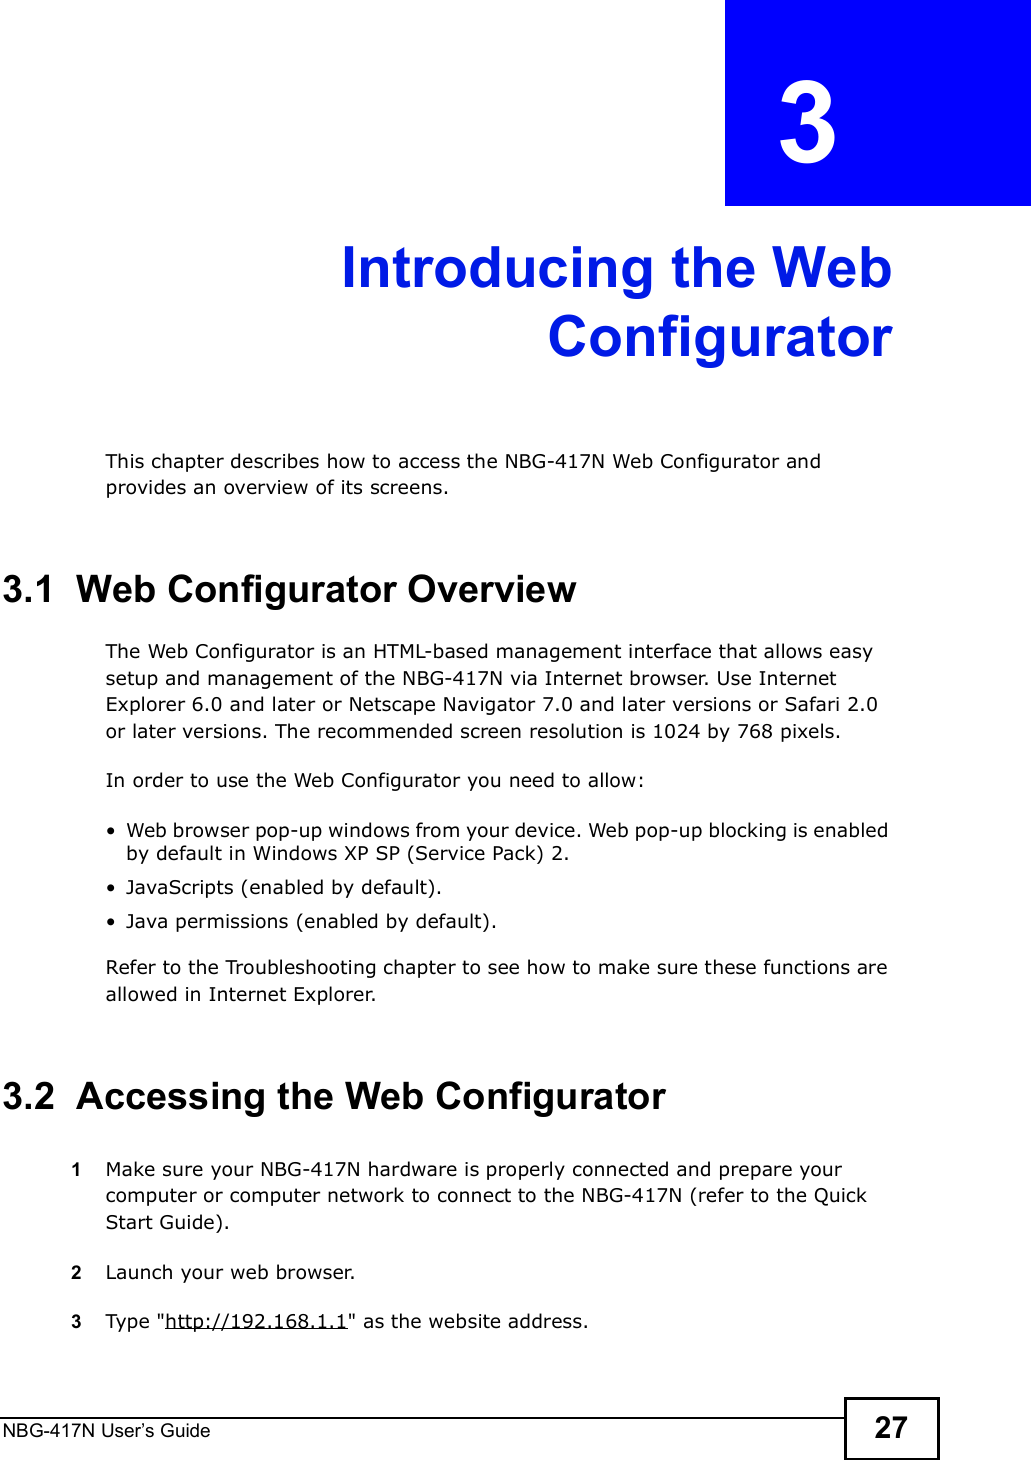 NBG-417N User s Guide 27CHAPTER  3 Introducing the WebConfiguratorThis chapter describes how to access the NBG-417N Web Configurator and provides an overview of its screens.3.1  Web Configurator OverviewThe Web Configurator is an HTML-based management interface that allows easy setup and management of the NBG-417N via Internet browser. Use Internet Explorer 6.0 and later or Netscape Navigator 7.0 and later versions or Safari 2.0 or later versions. The recommended screen resolution is 1024 by 768 pixels.In order to use the Web Configurator you need to allow: Web browser pop-up windows from your device. Web pop-up blocking is enabled by default in Windows XP SP (Service Pack) 2. JavaScripts (enabled by default). Java permissions (enabled by default).Refer to the Troubleshooting chapter to see how to make sure these functions are allowed in Internet Explorer.3.2  Accessing the Web Configurator1Make sure your NBG-417N hardware is properly connected and prepare your computer or computer network to connect to the NBG-417N (refer to the Quick Start Guide).2Launch your web browser.3Type &quot;http://192.168.1.1&quot; as the website address. 